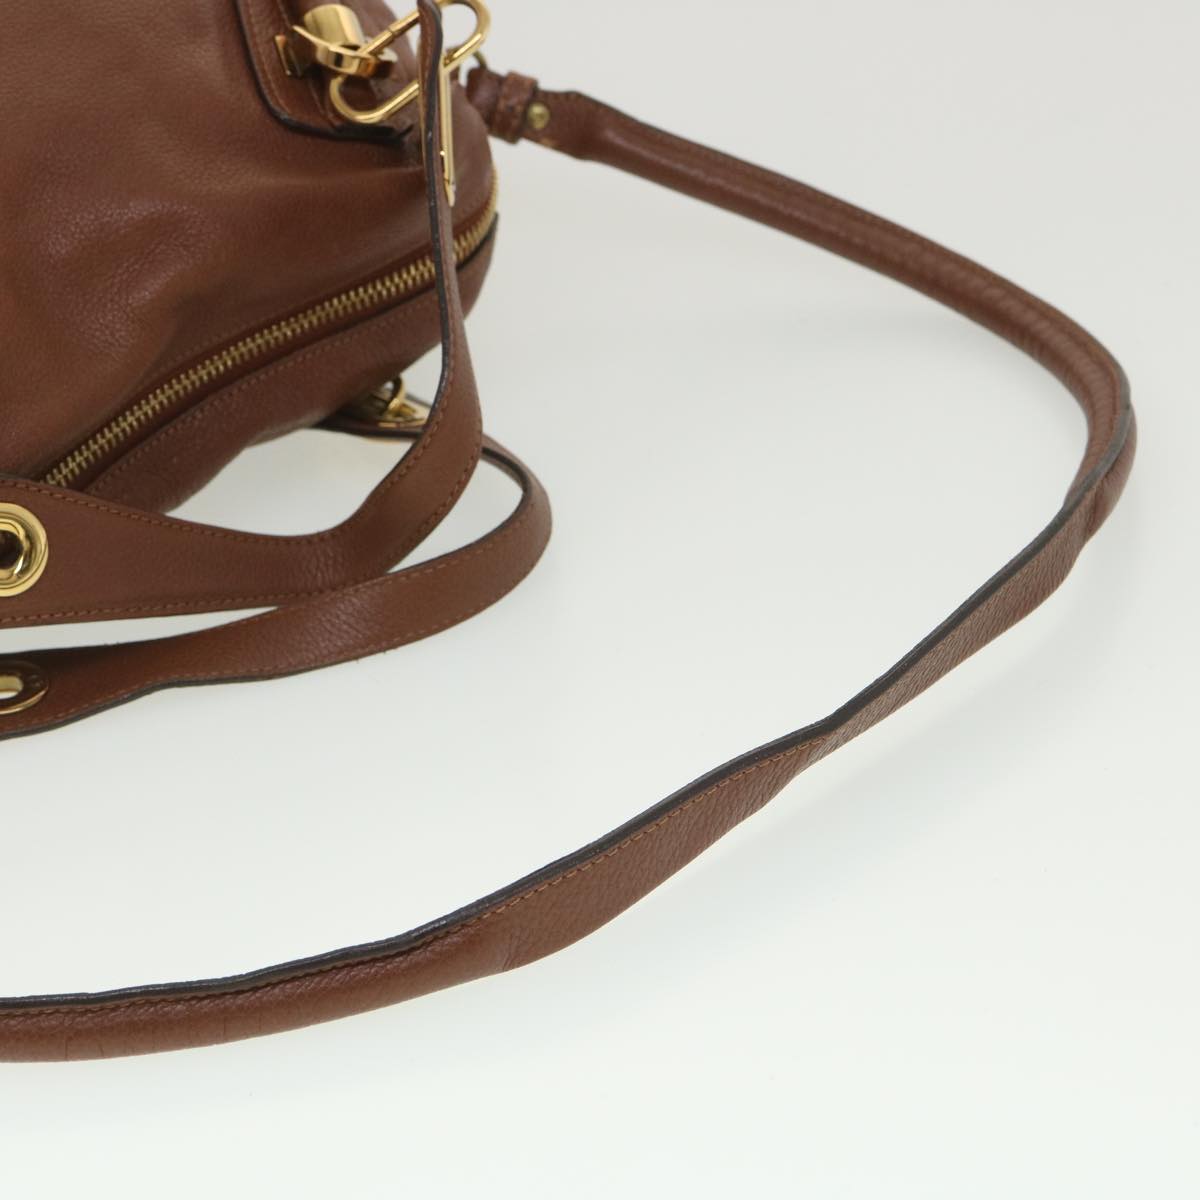 Chloe Paraty Hand Bag Leather 2way Brown Auth 37965